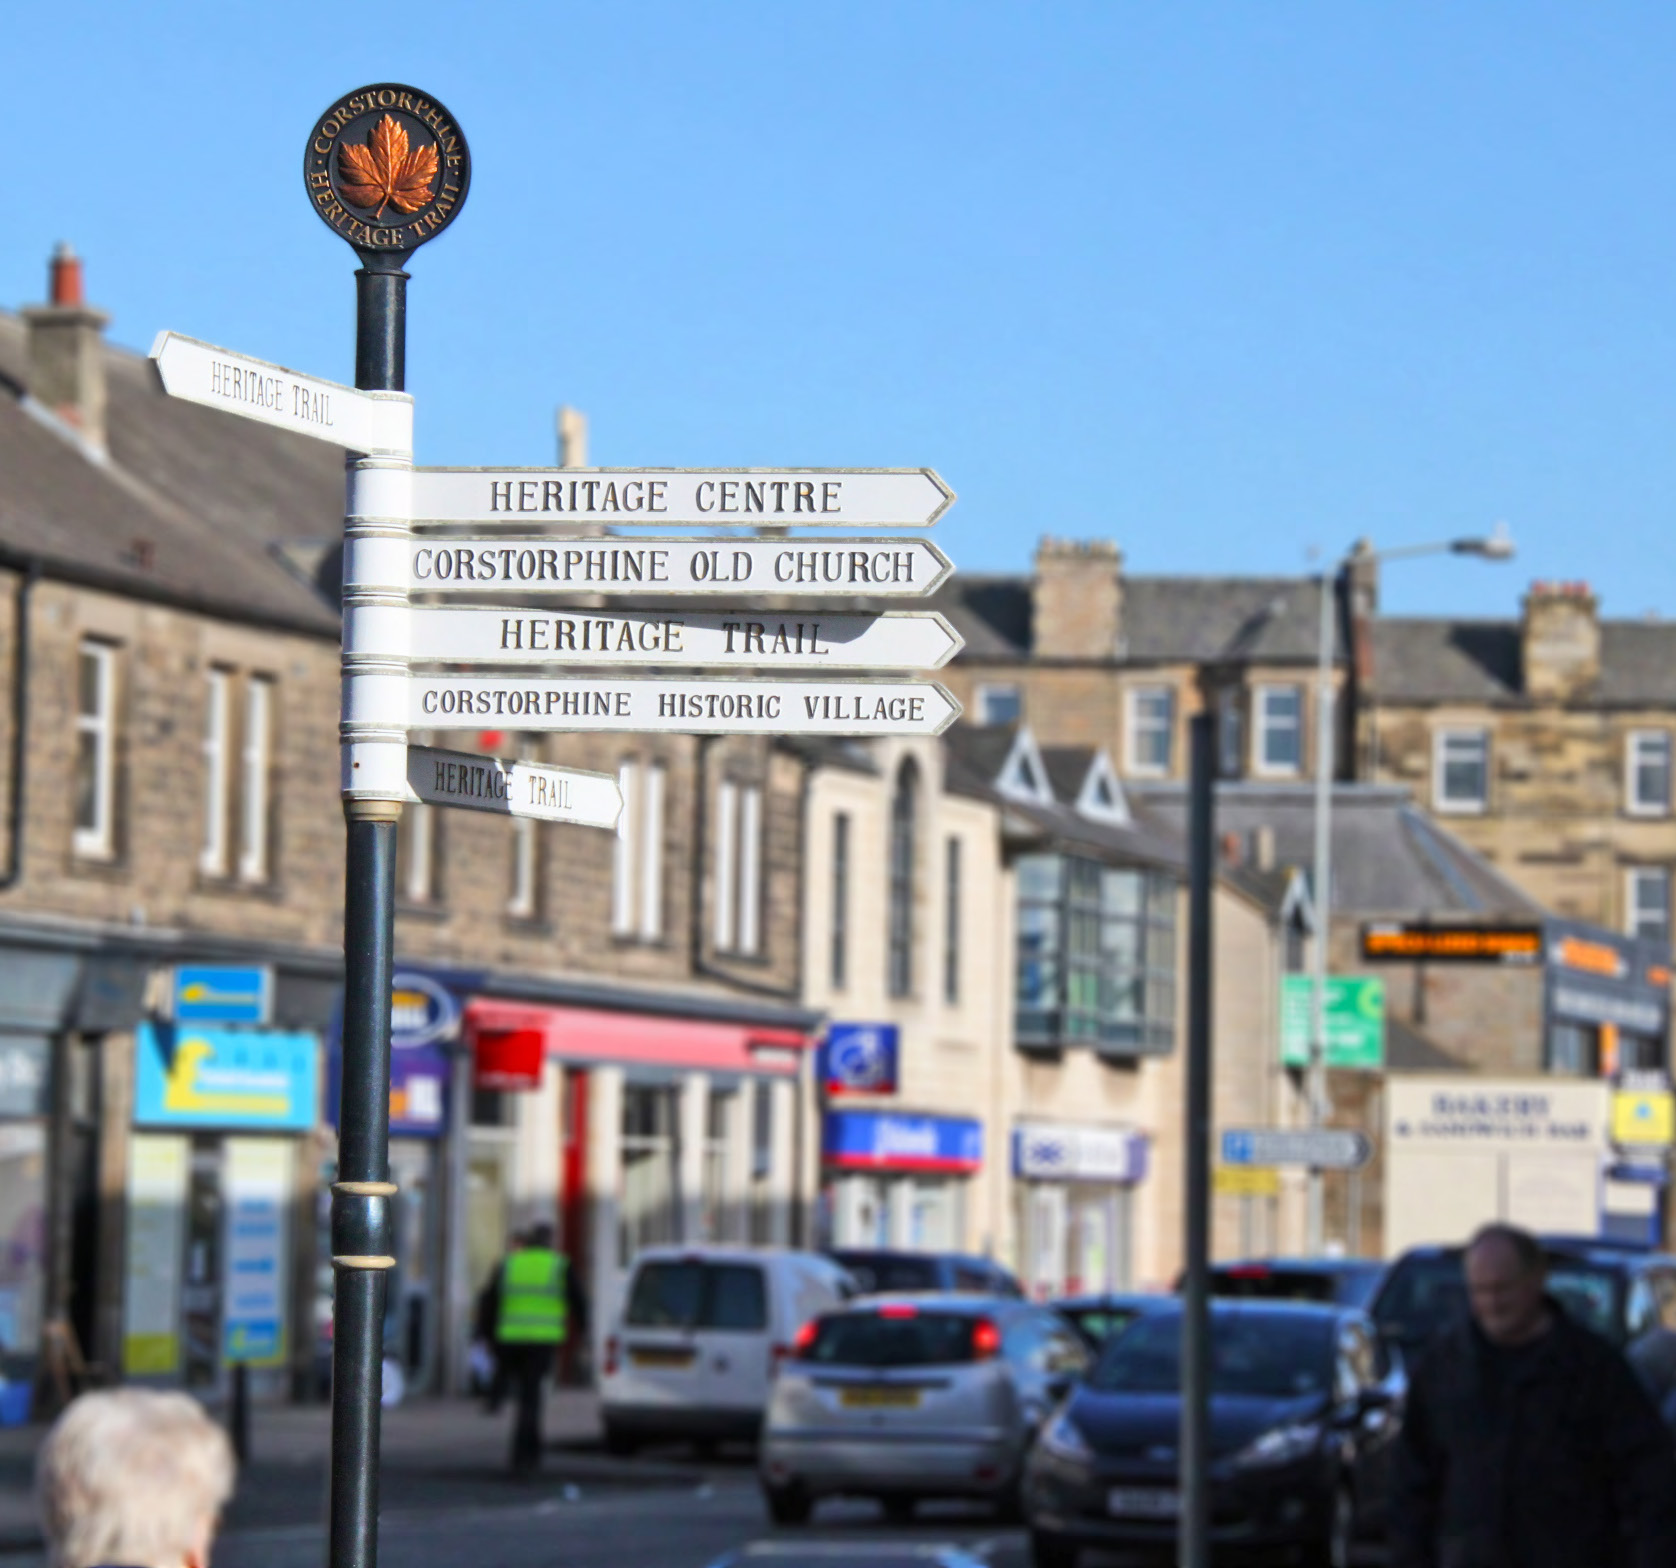 A street sign on Corstorphine's High Street with directions for Corstorphine Old Church, Heritage Centre, Heritage Trail and Corstorphine Historic Village.